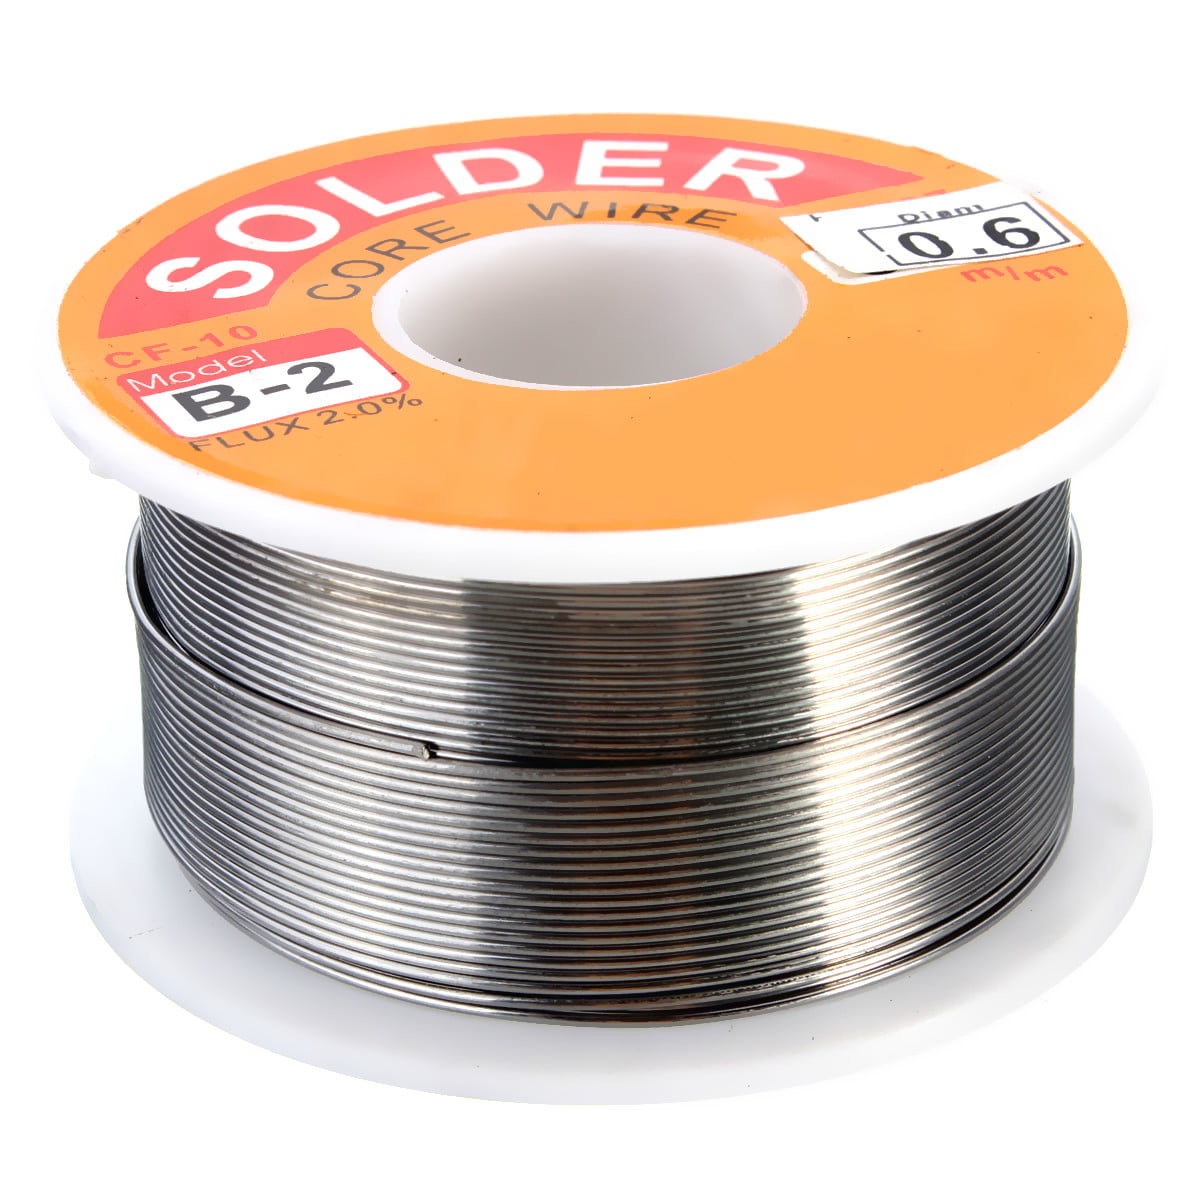 63/37 100g 0.8mm Rosin Core Reel Tin Lead Wire 2% Flux Electric Soldering Iron 